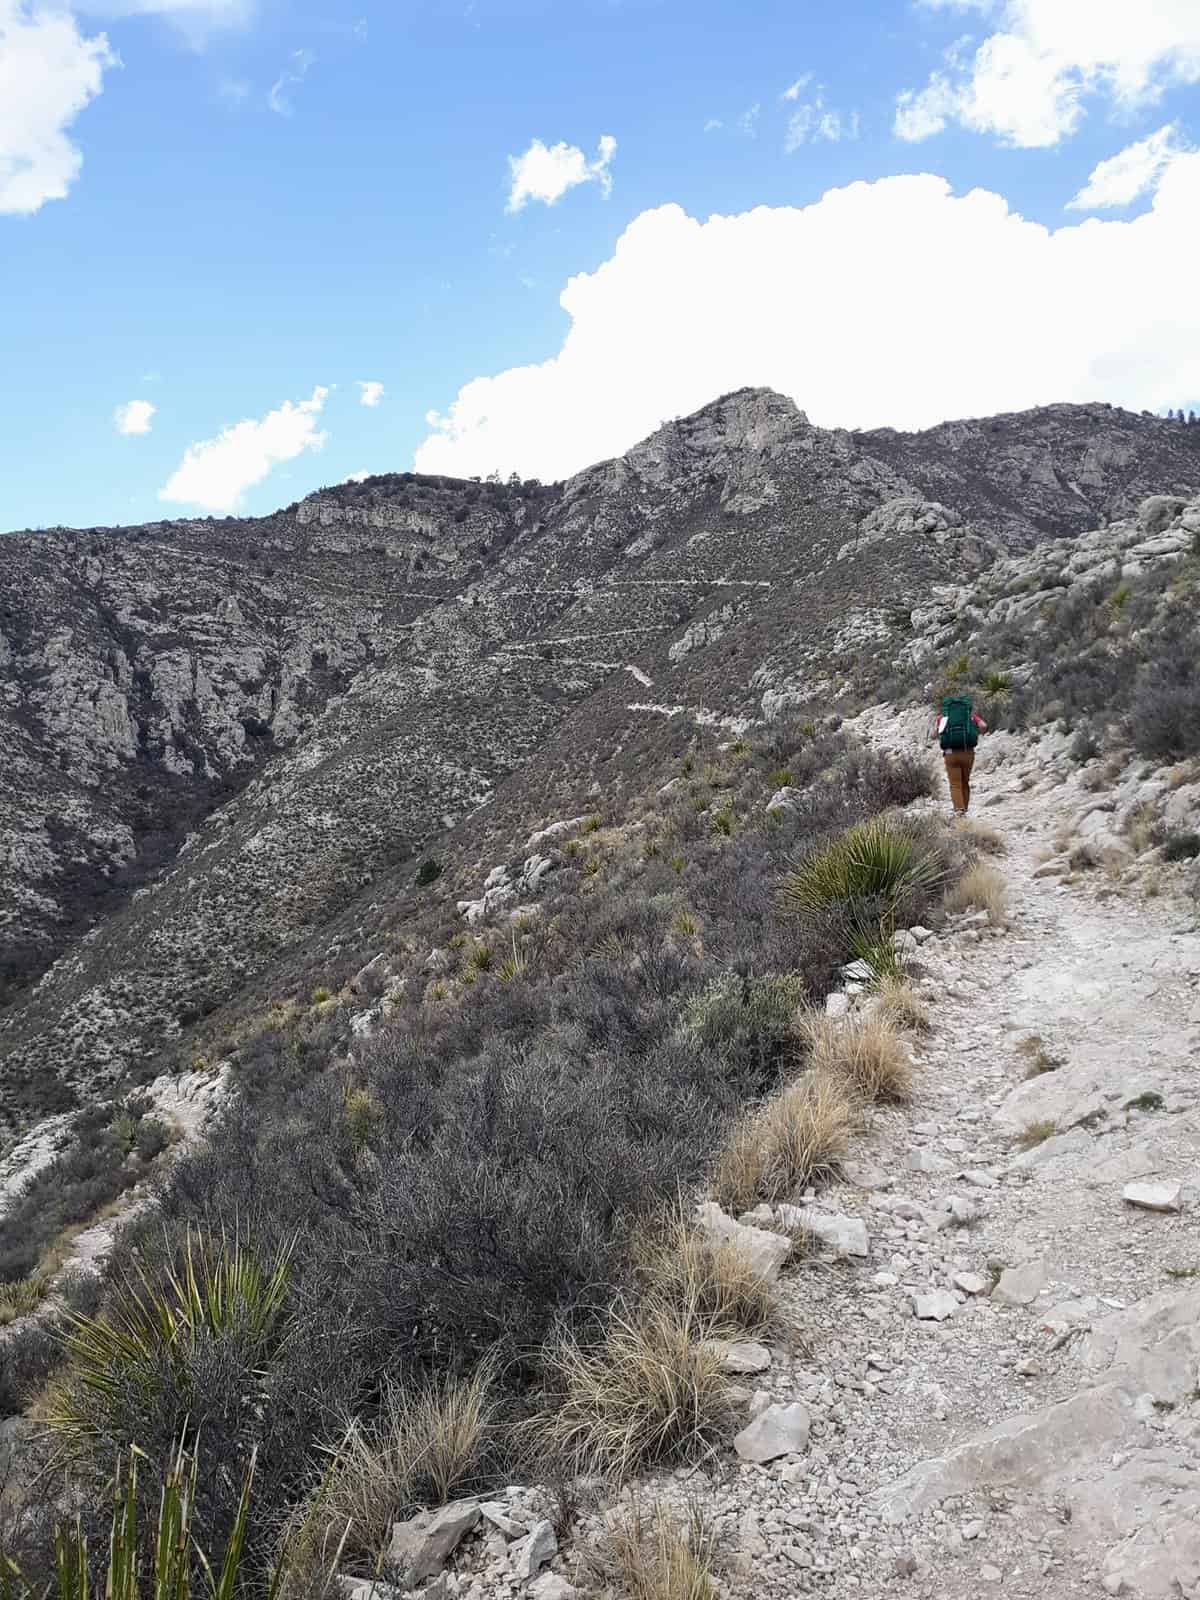 Uphill climbing through the Guadalupe Mountains